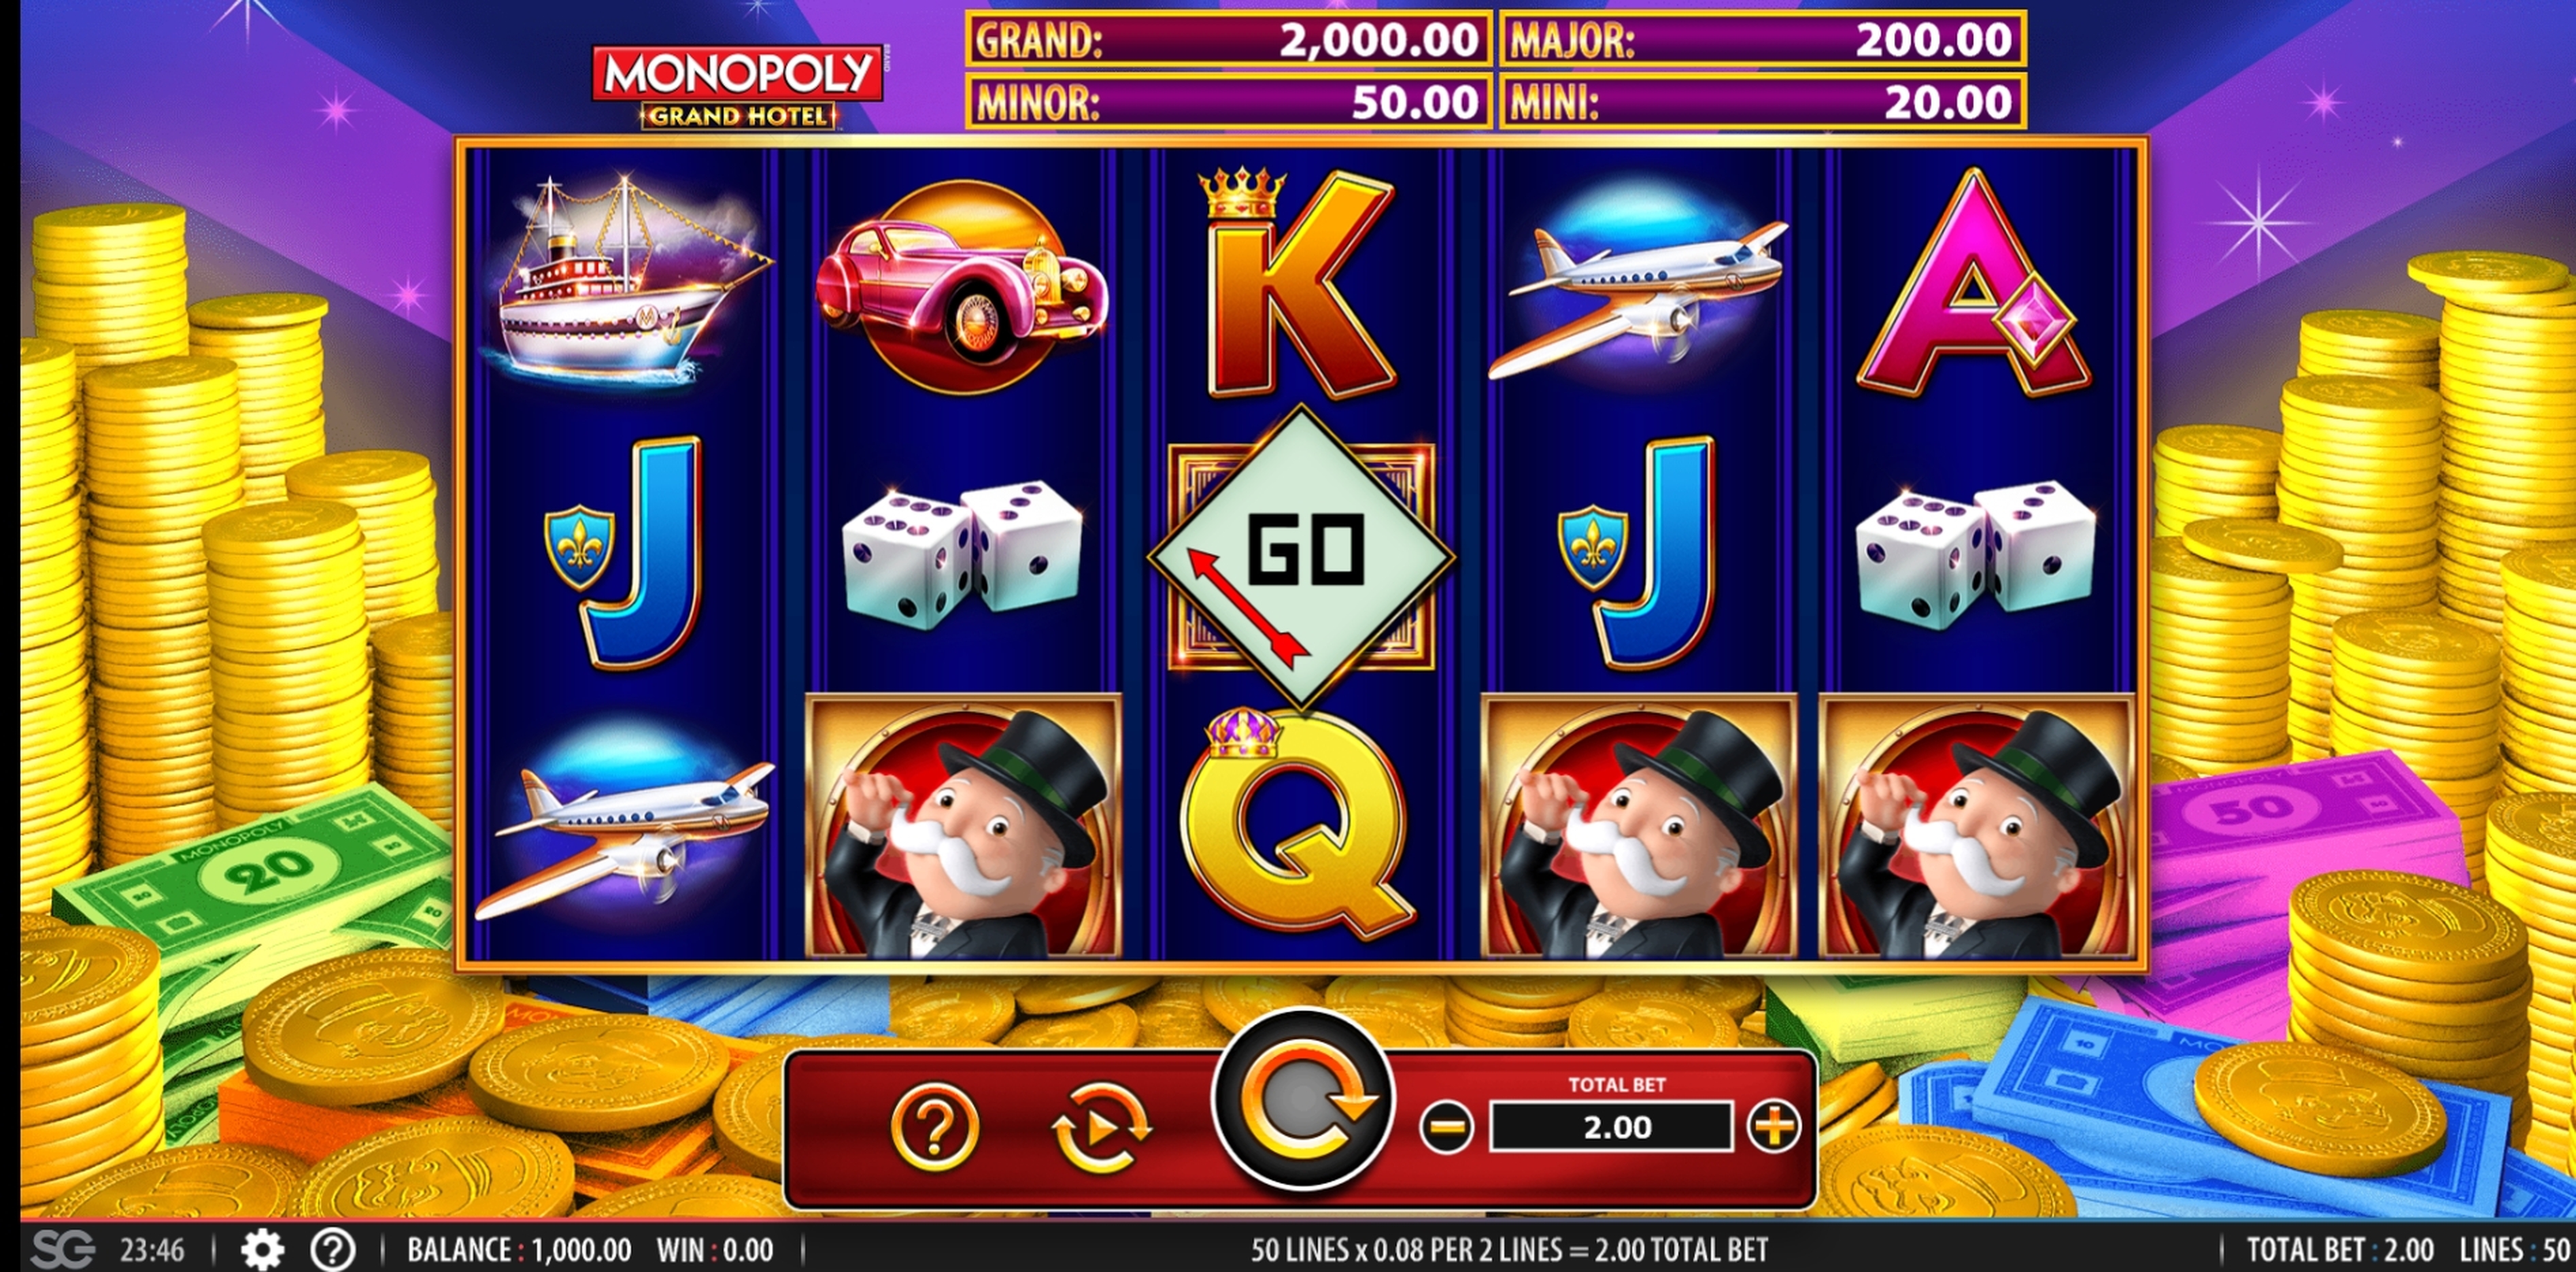 Reels in Monopoly Grand Hotel Slot Game by WMS